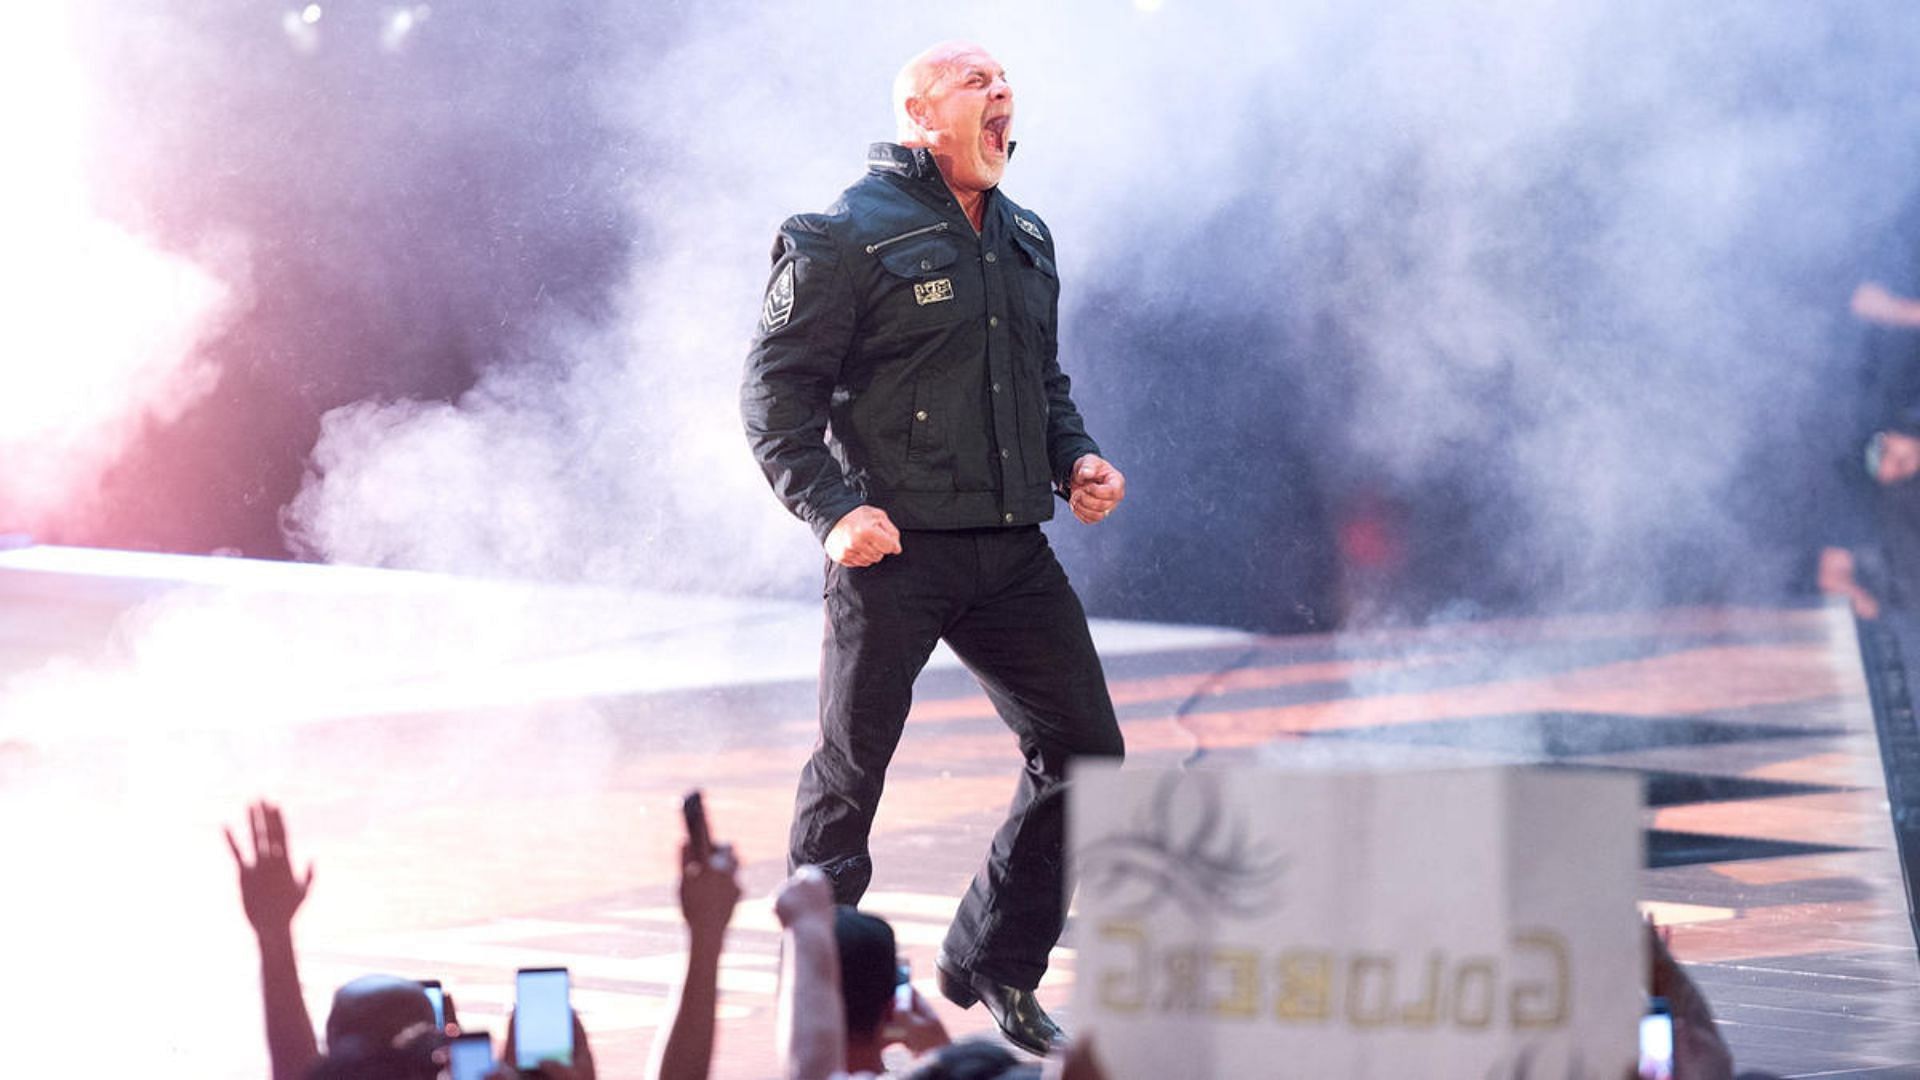 What is next for WWE legend Goldberg?